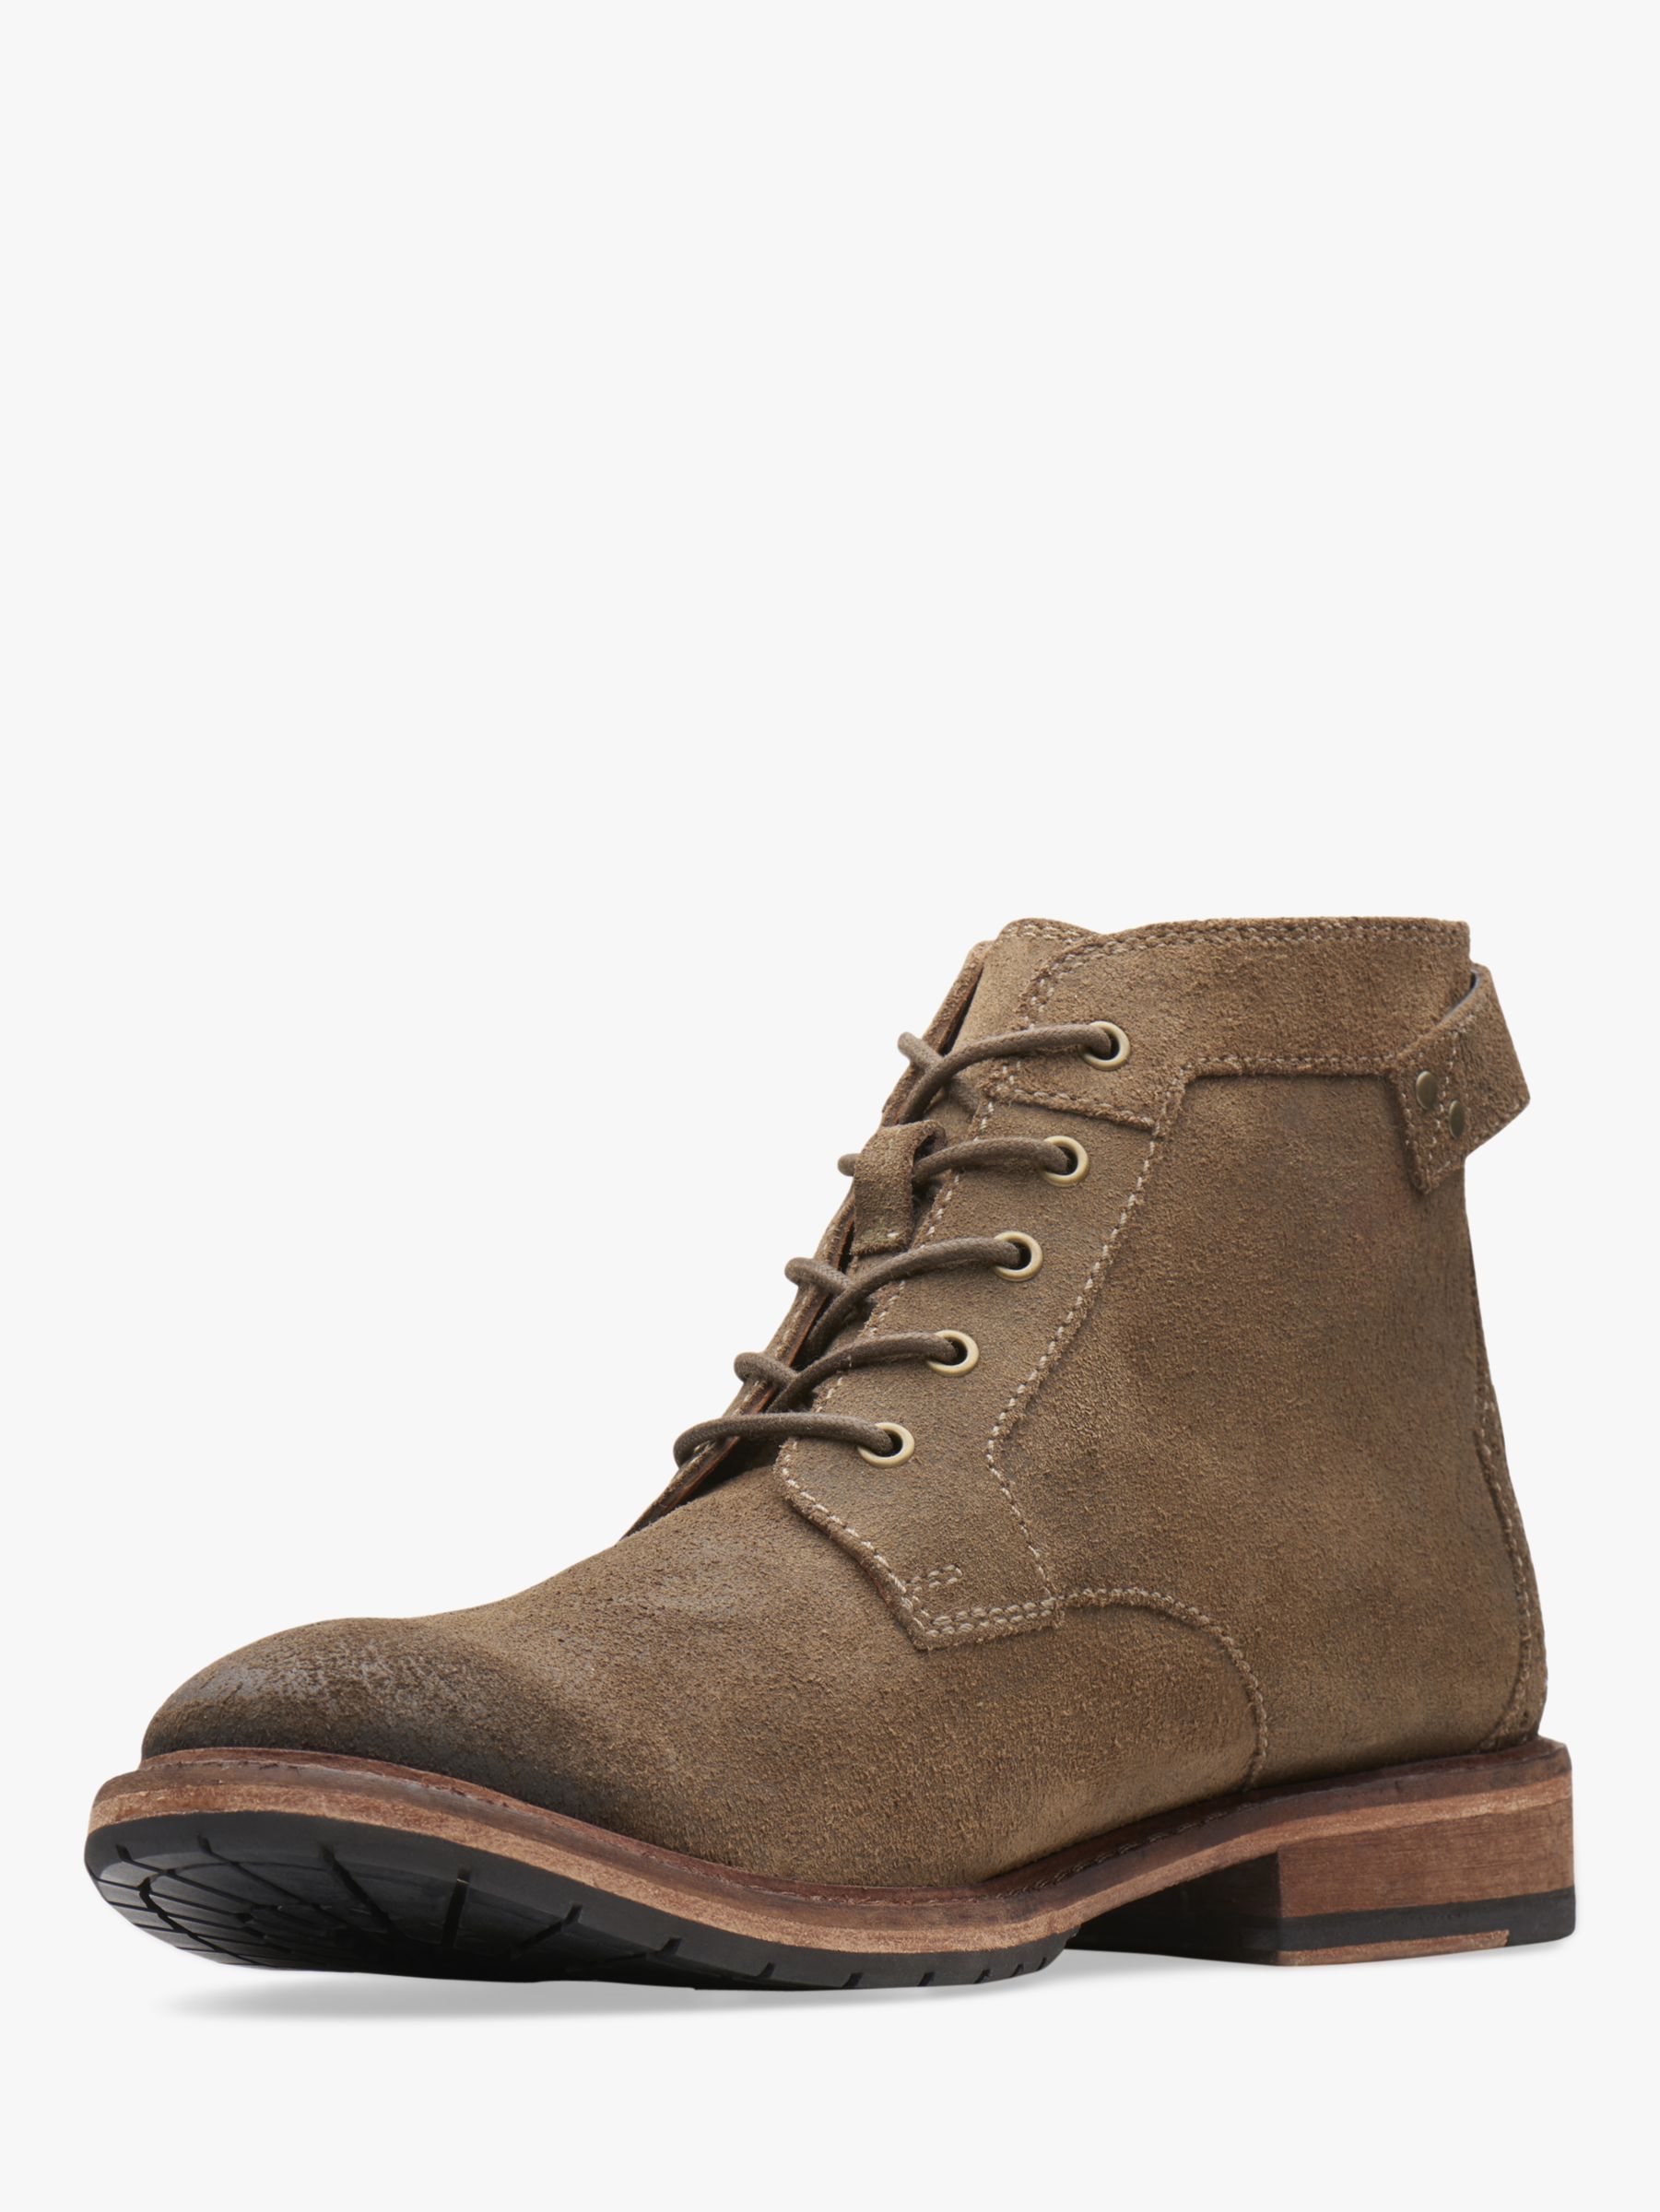 Clarks Clarkdale Bud Suede Boots, Khaki 